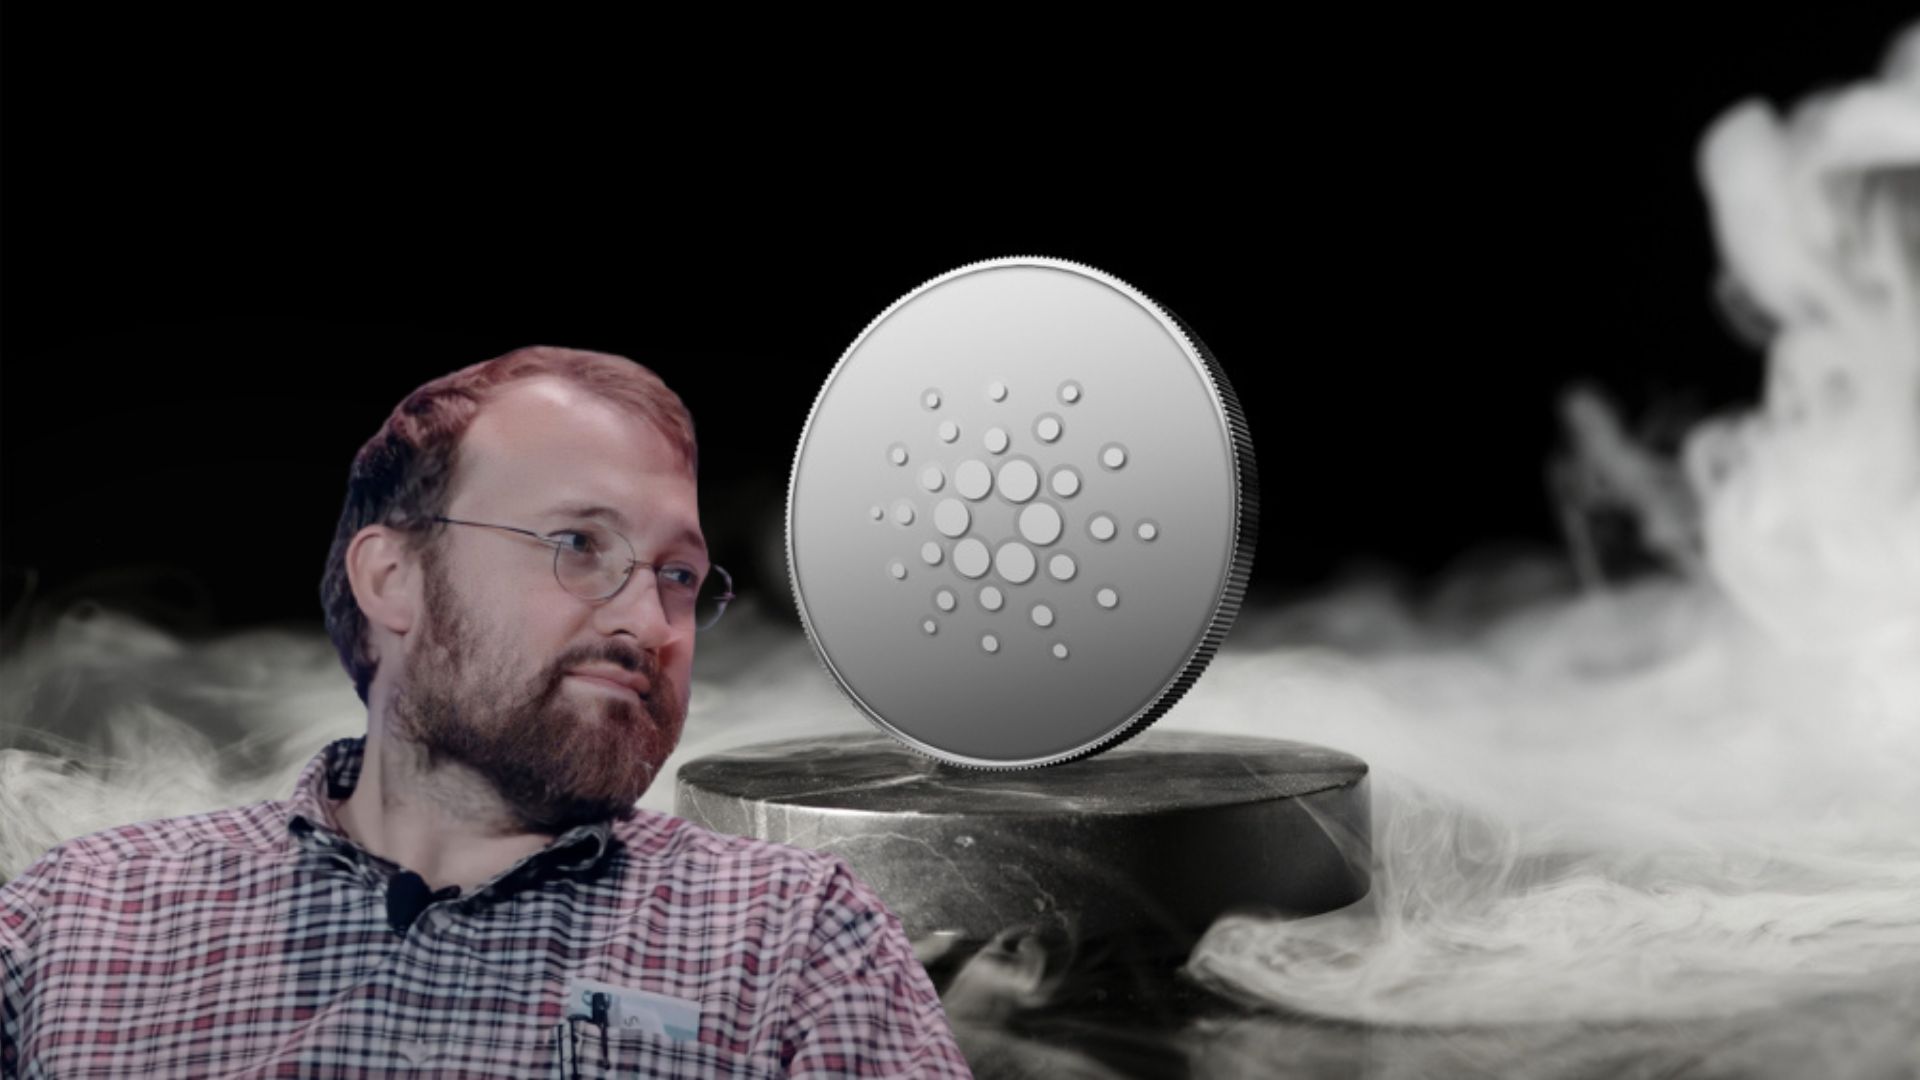 Cardano's Hoskinson Dissects 'ETHGate' Allegations, Challenges XRP Community Claims